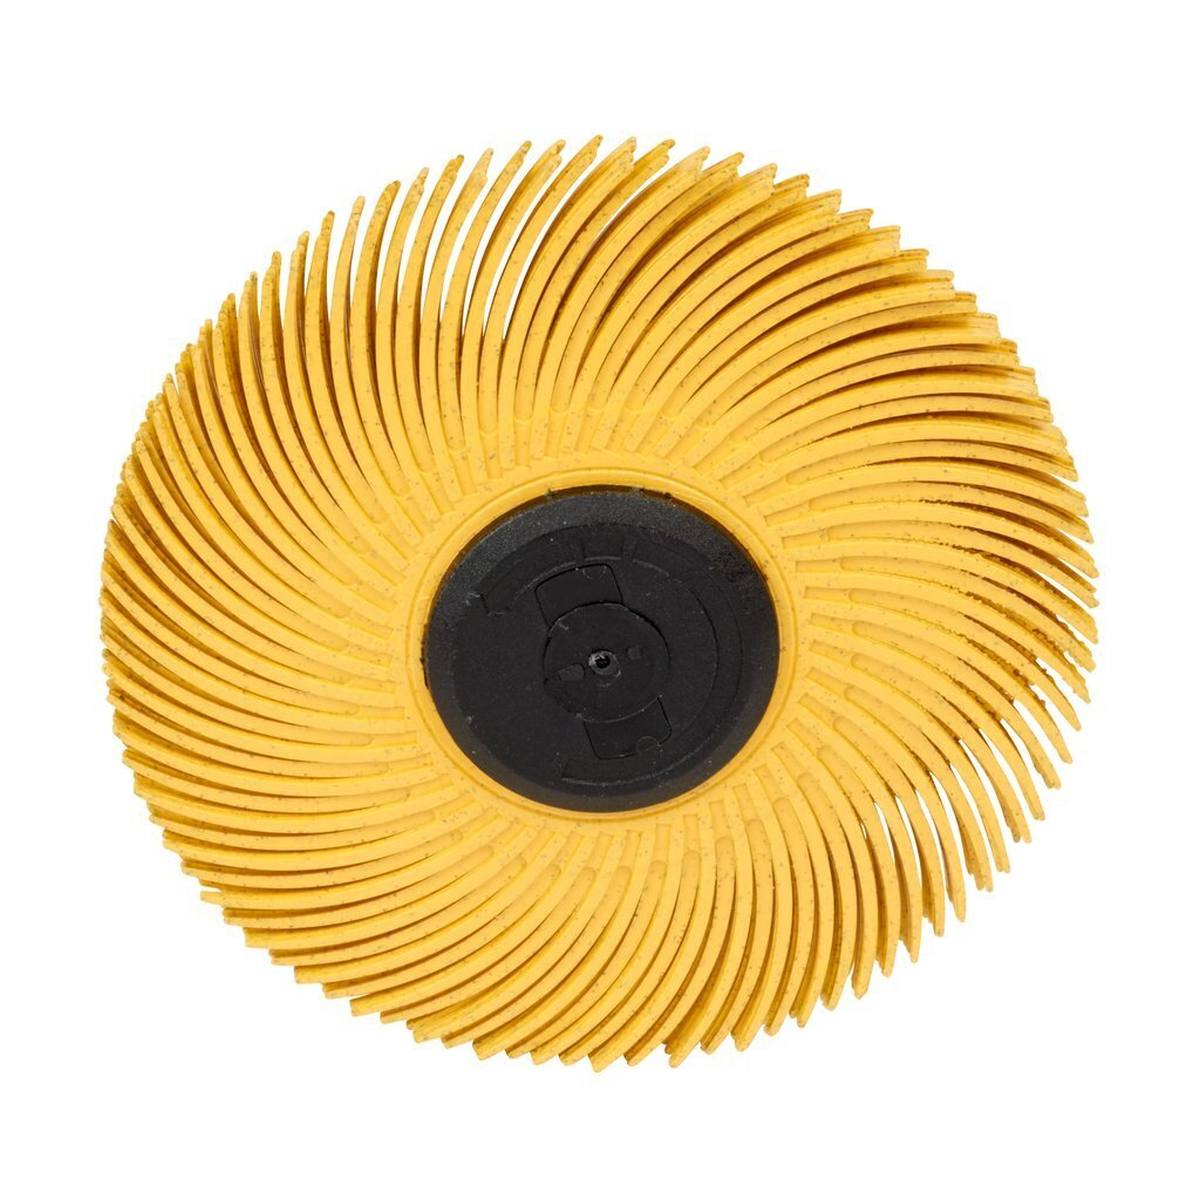 3M Scotch-Brite Radial Bristle Disc BB-ZS with shaft, yellow, 76.2 mm, P80, type C #62968